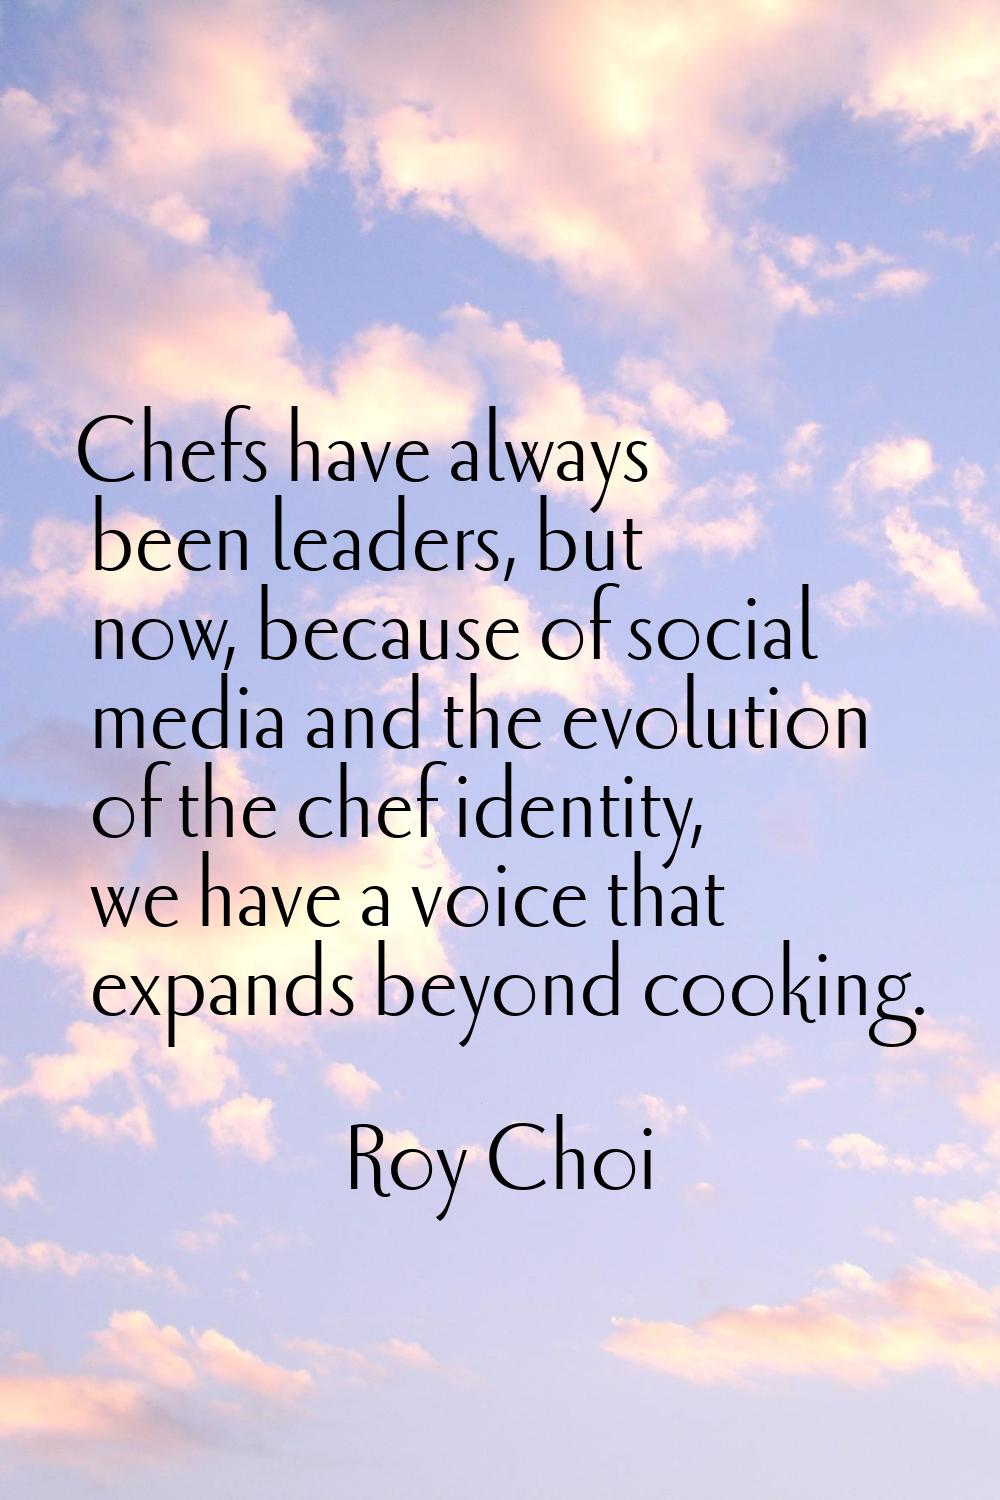 Chefs have always been leaders, but now, because of social media and the evolution of the chef iden